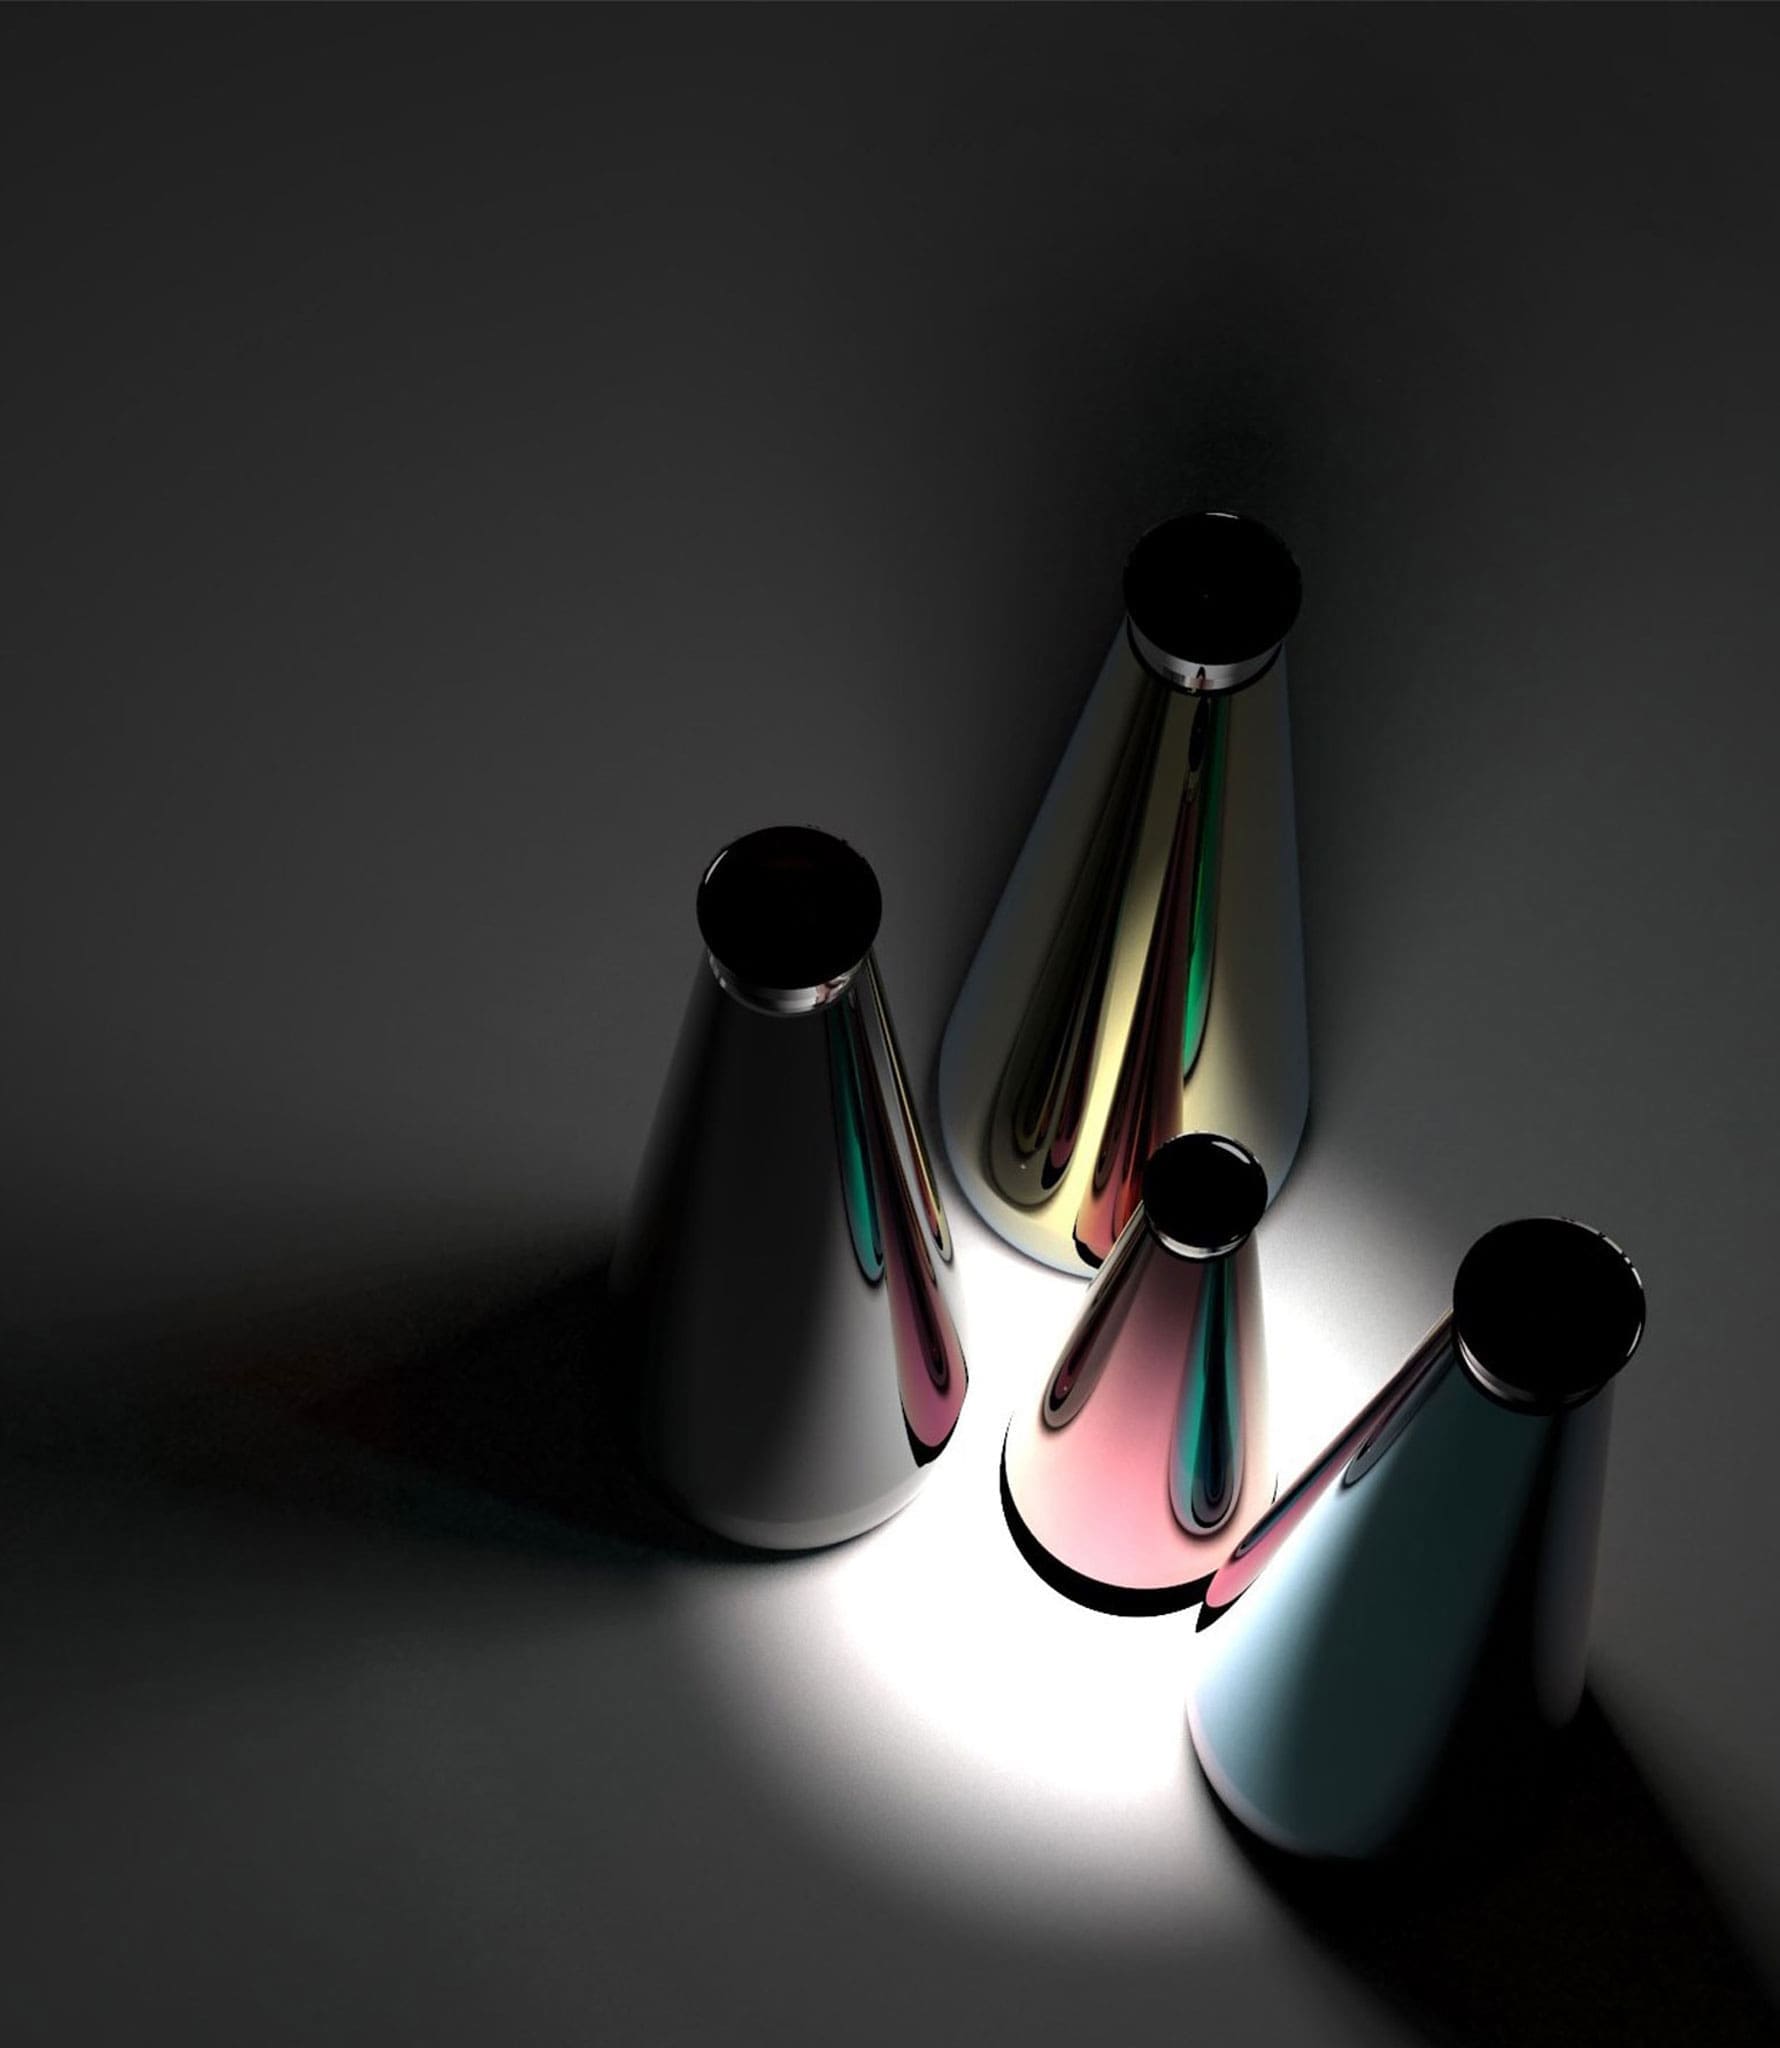 Backlit shot of a collection of metallic looking bottles